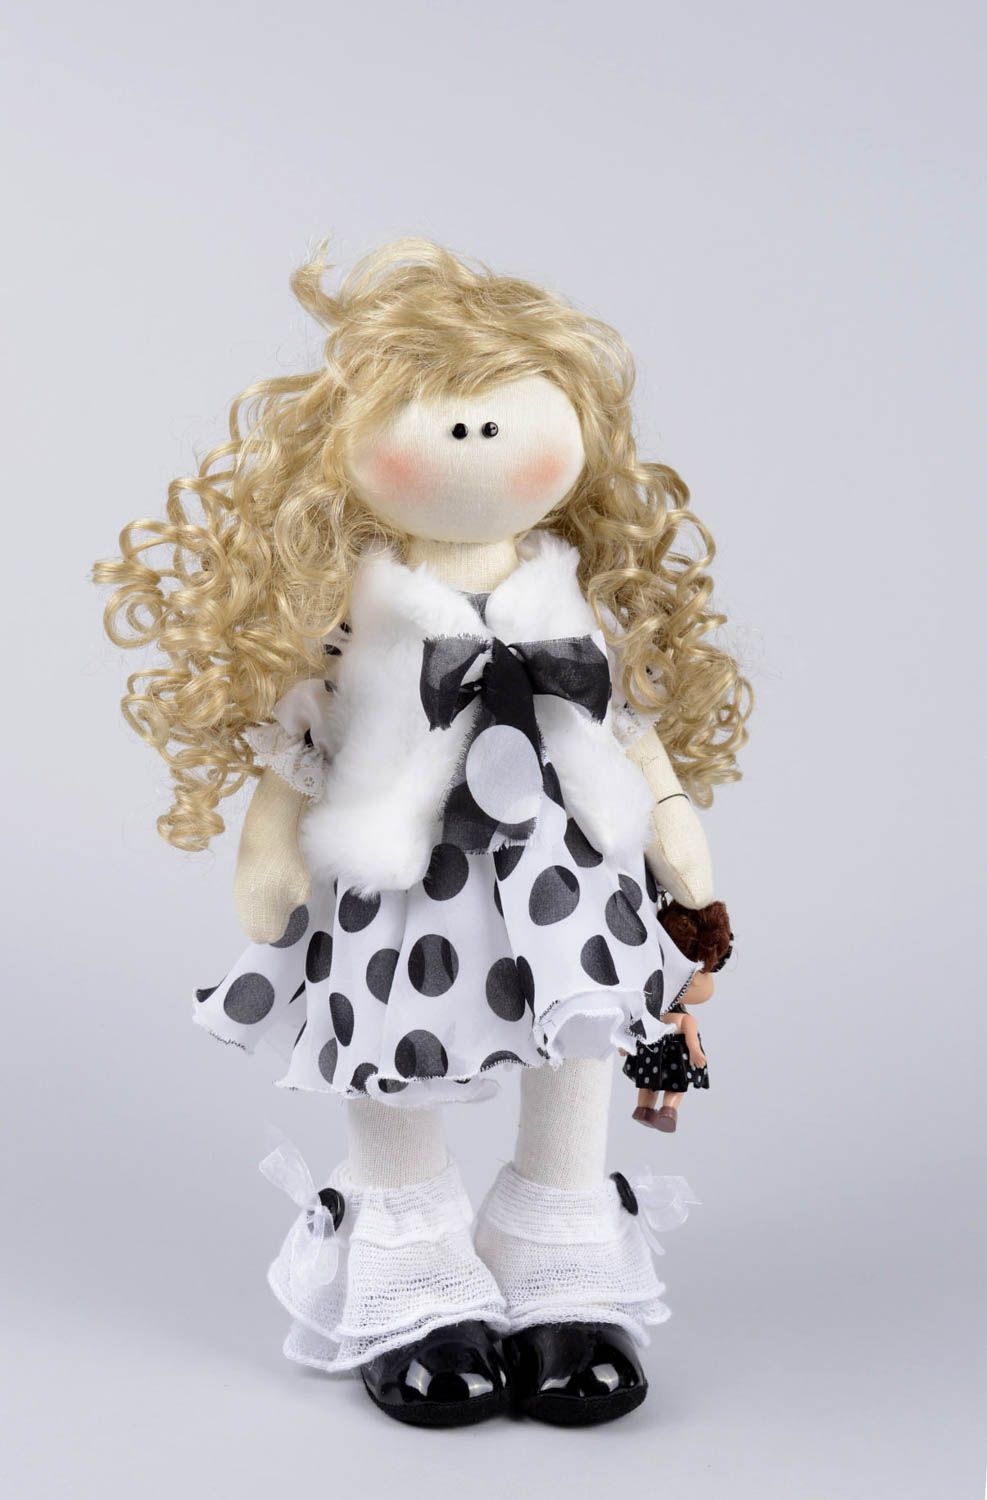 Handmade soft doll designer doll stuffed toy home decor gifts for girls photo 1